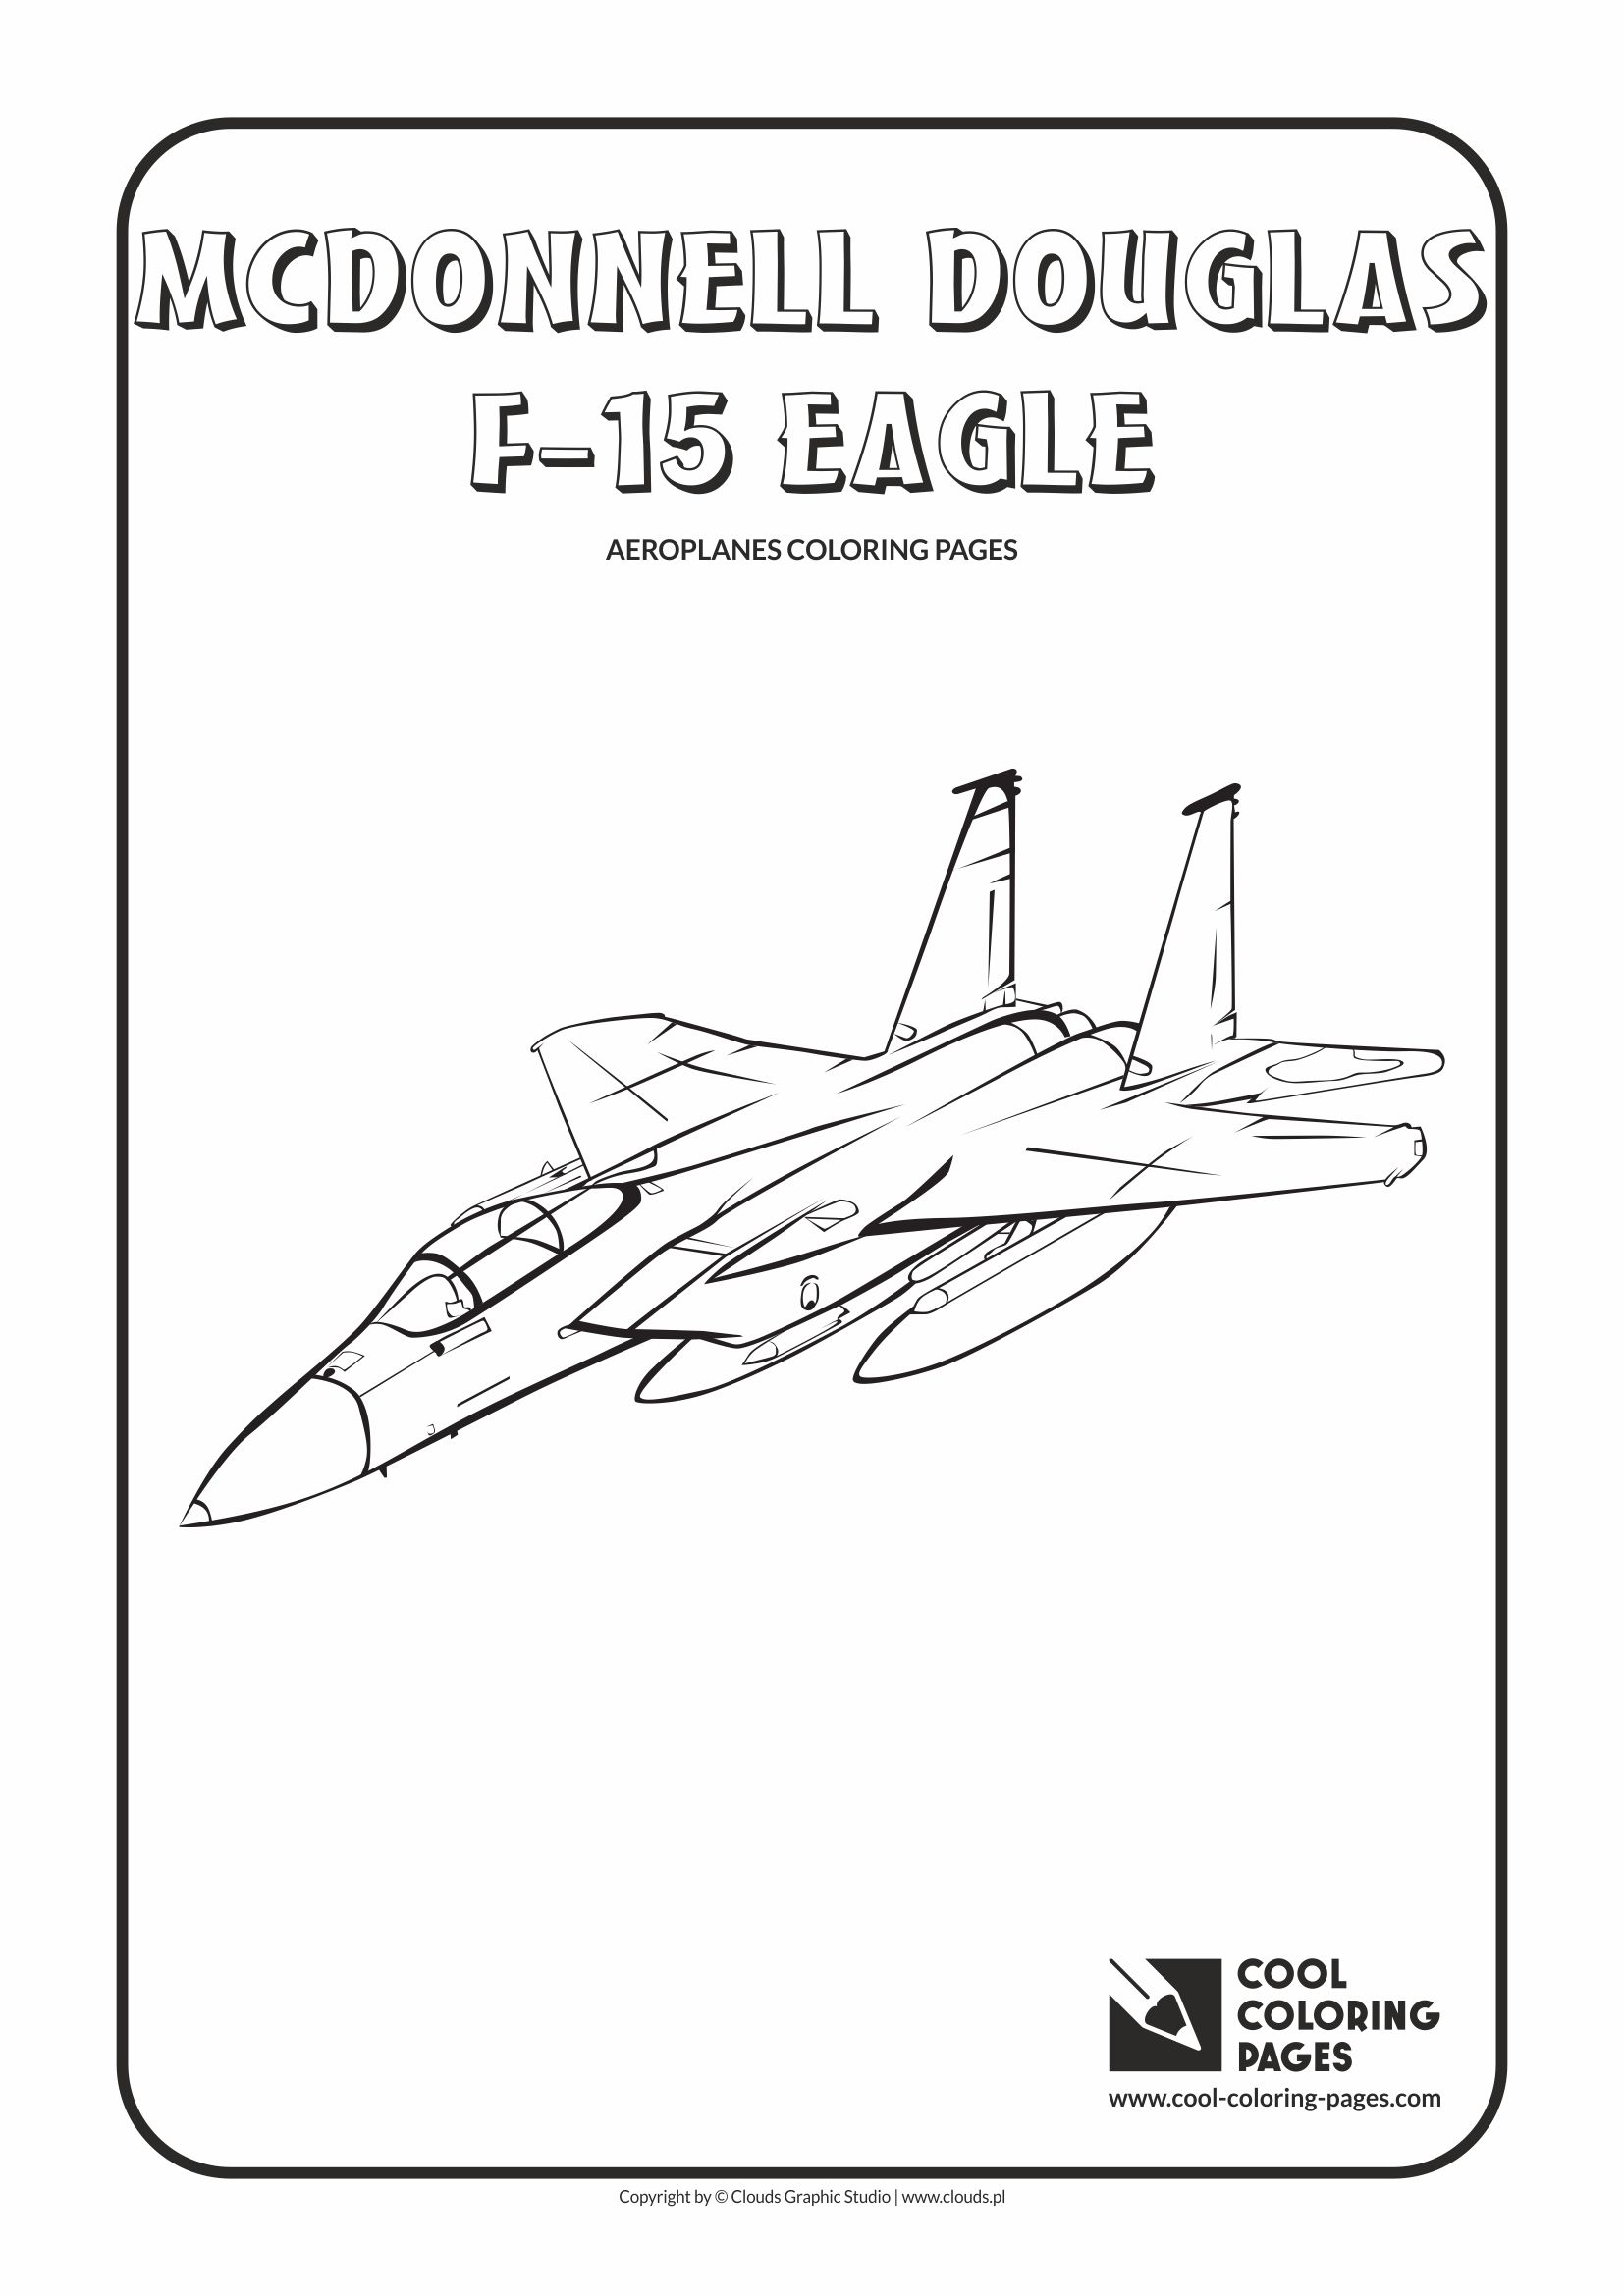 Cool Coloring Pages - Vehicles / McDonnell Douglas F-15 Eagle / Coloring page with McDonnell Douglas F-15 Eagle